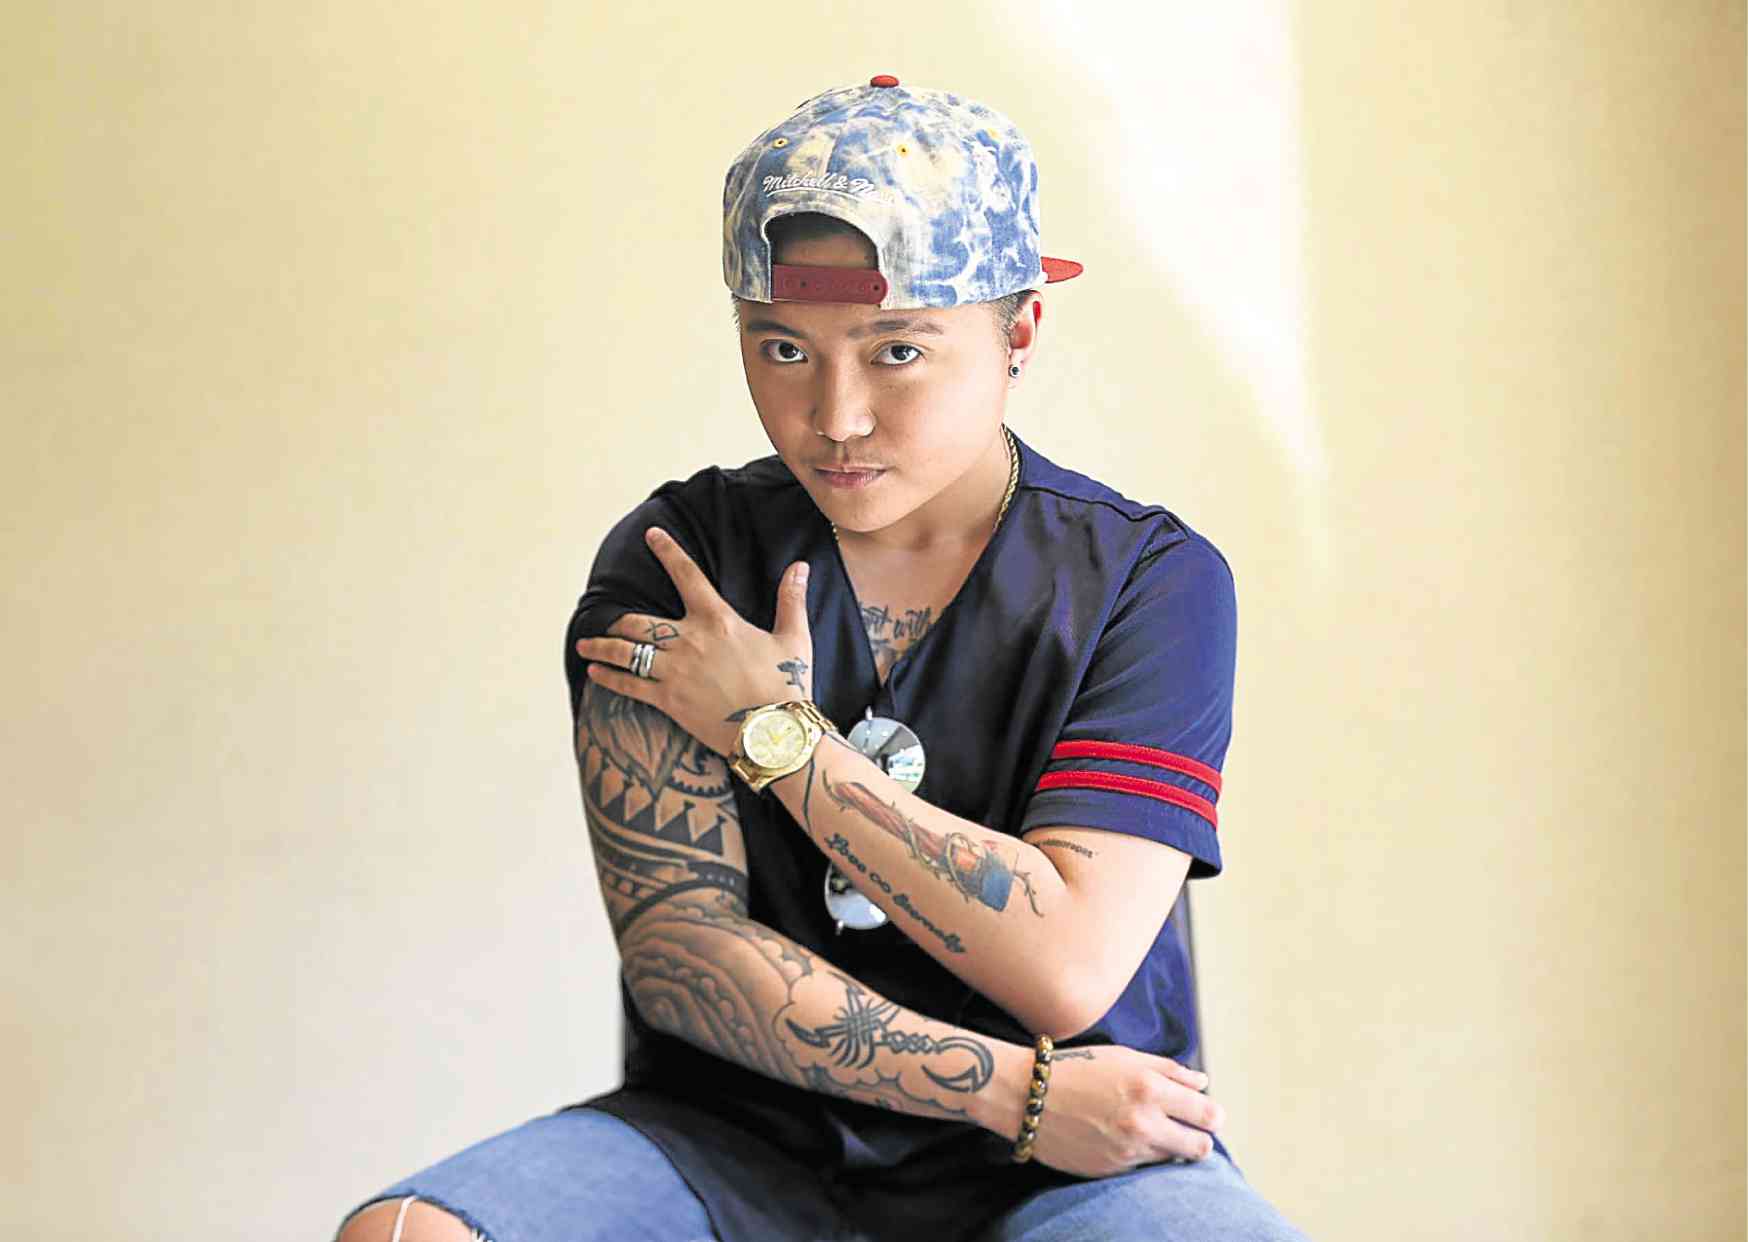 I had my breasts removed on March 29. I have also been taking testosterone shots. The first was on April 19 Jake Zyrus Singer—Photo by Lyn Rillon